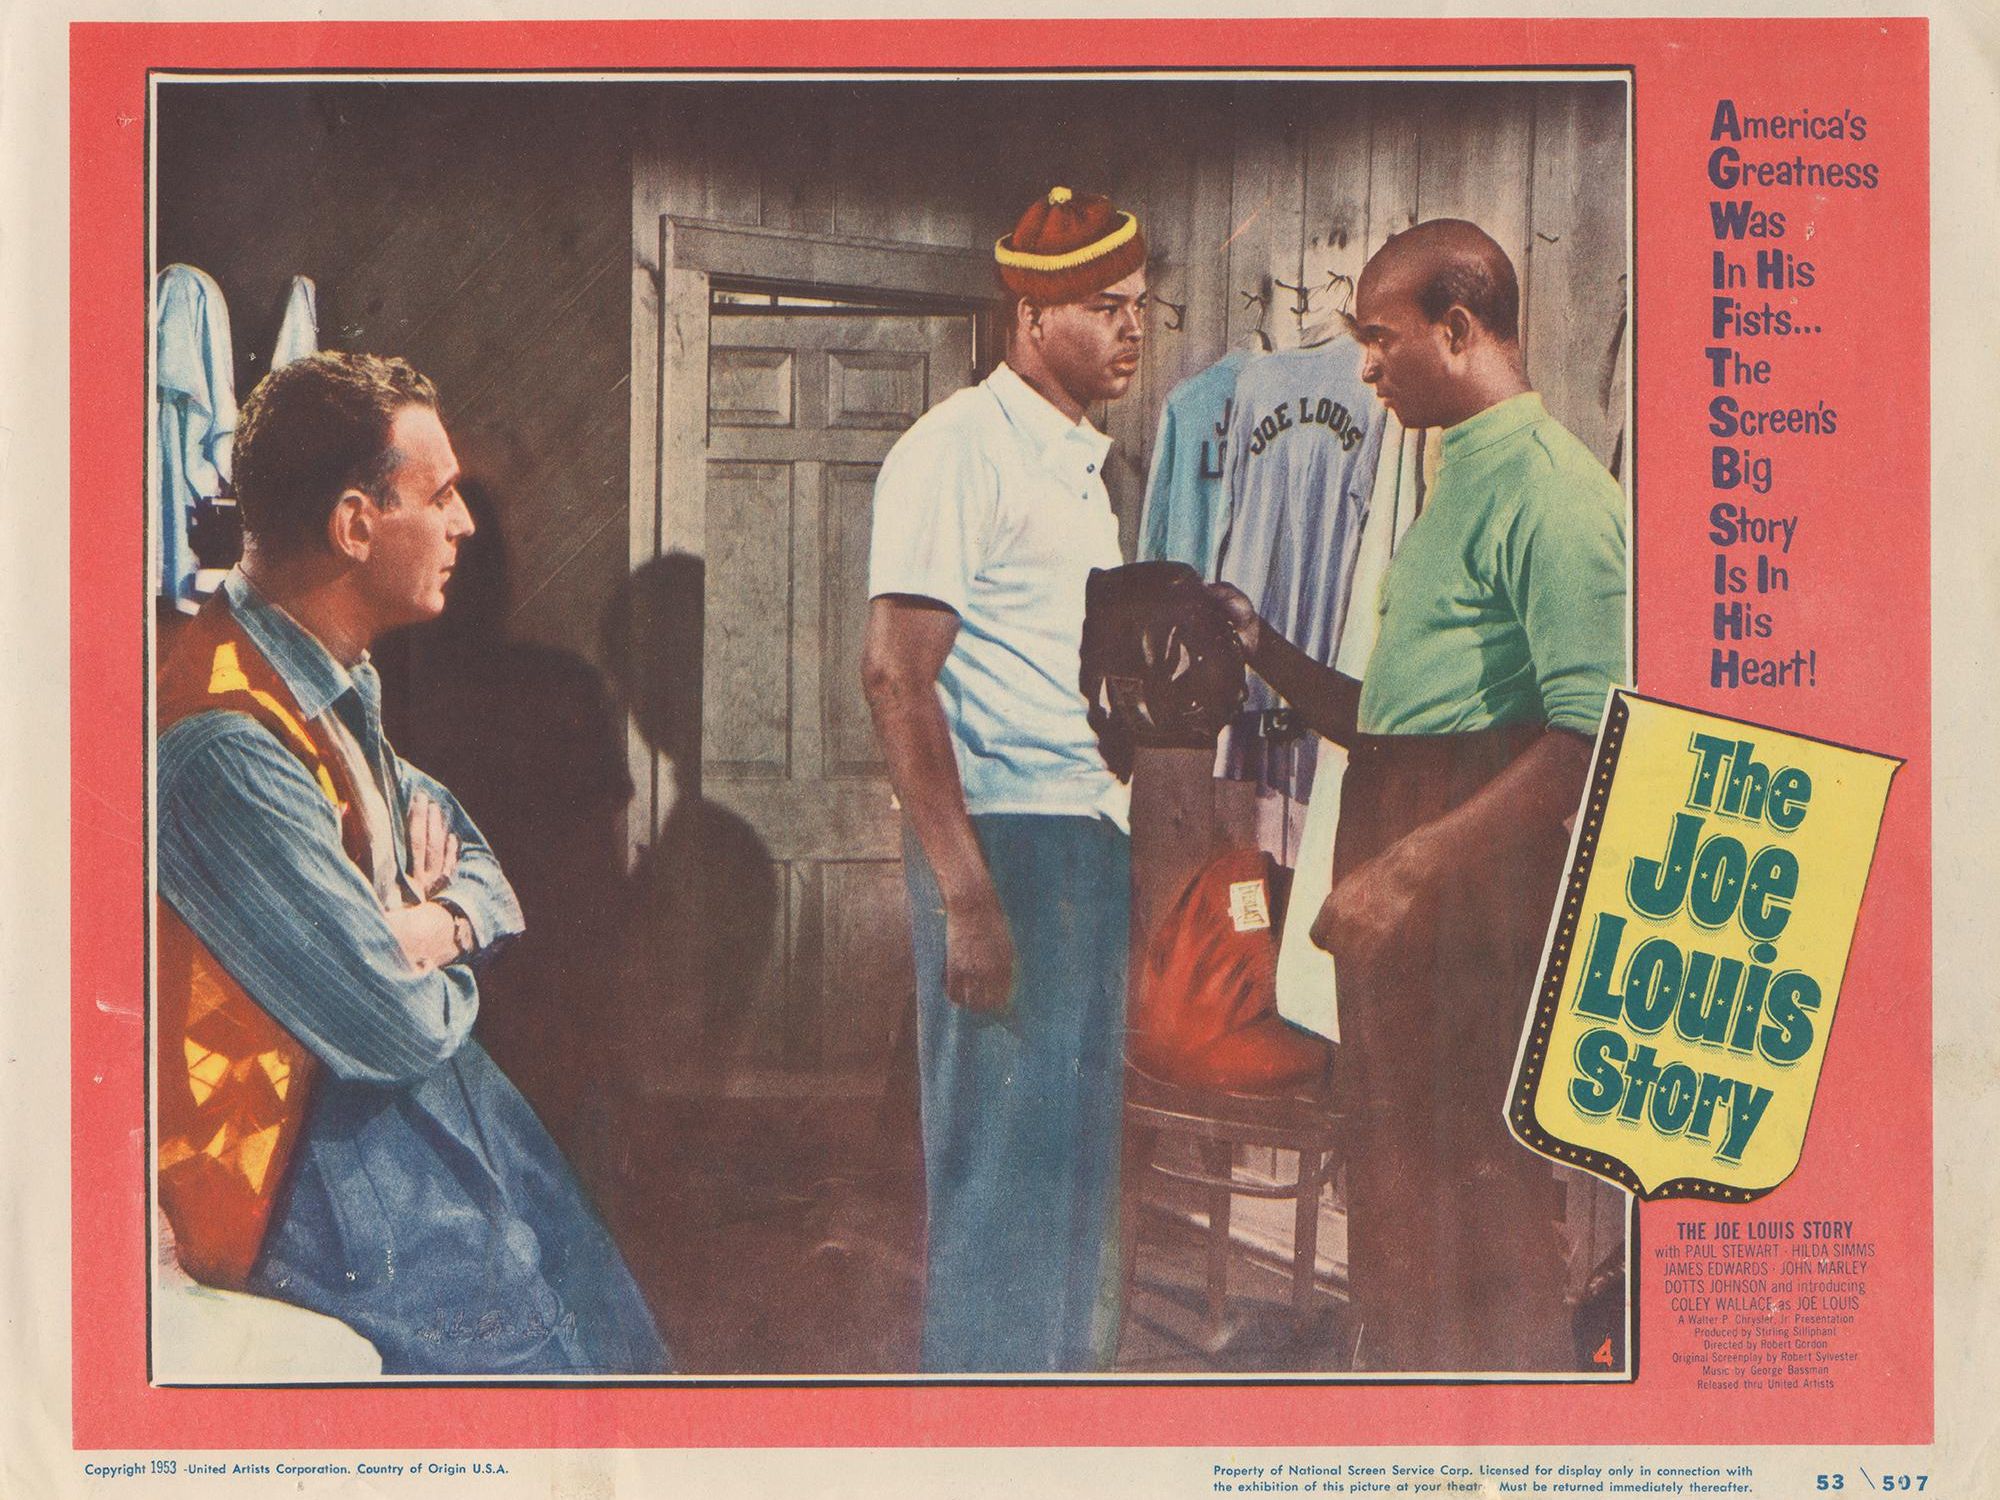 Lobby card for The Joe Louis Story showing Coley Wallace as Joe Louis with two supporting cast members